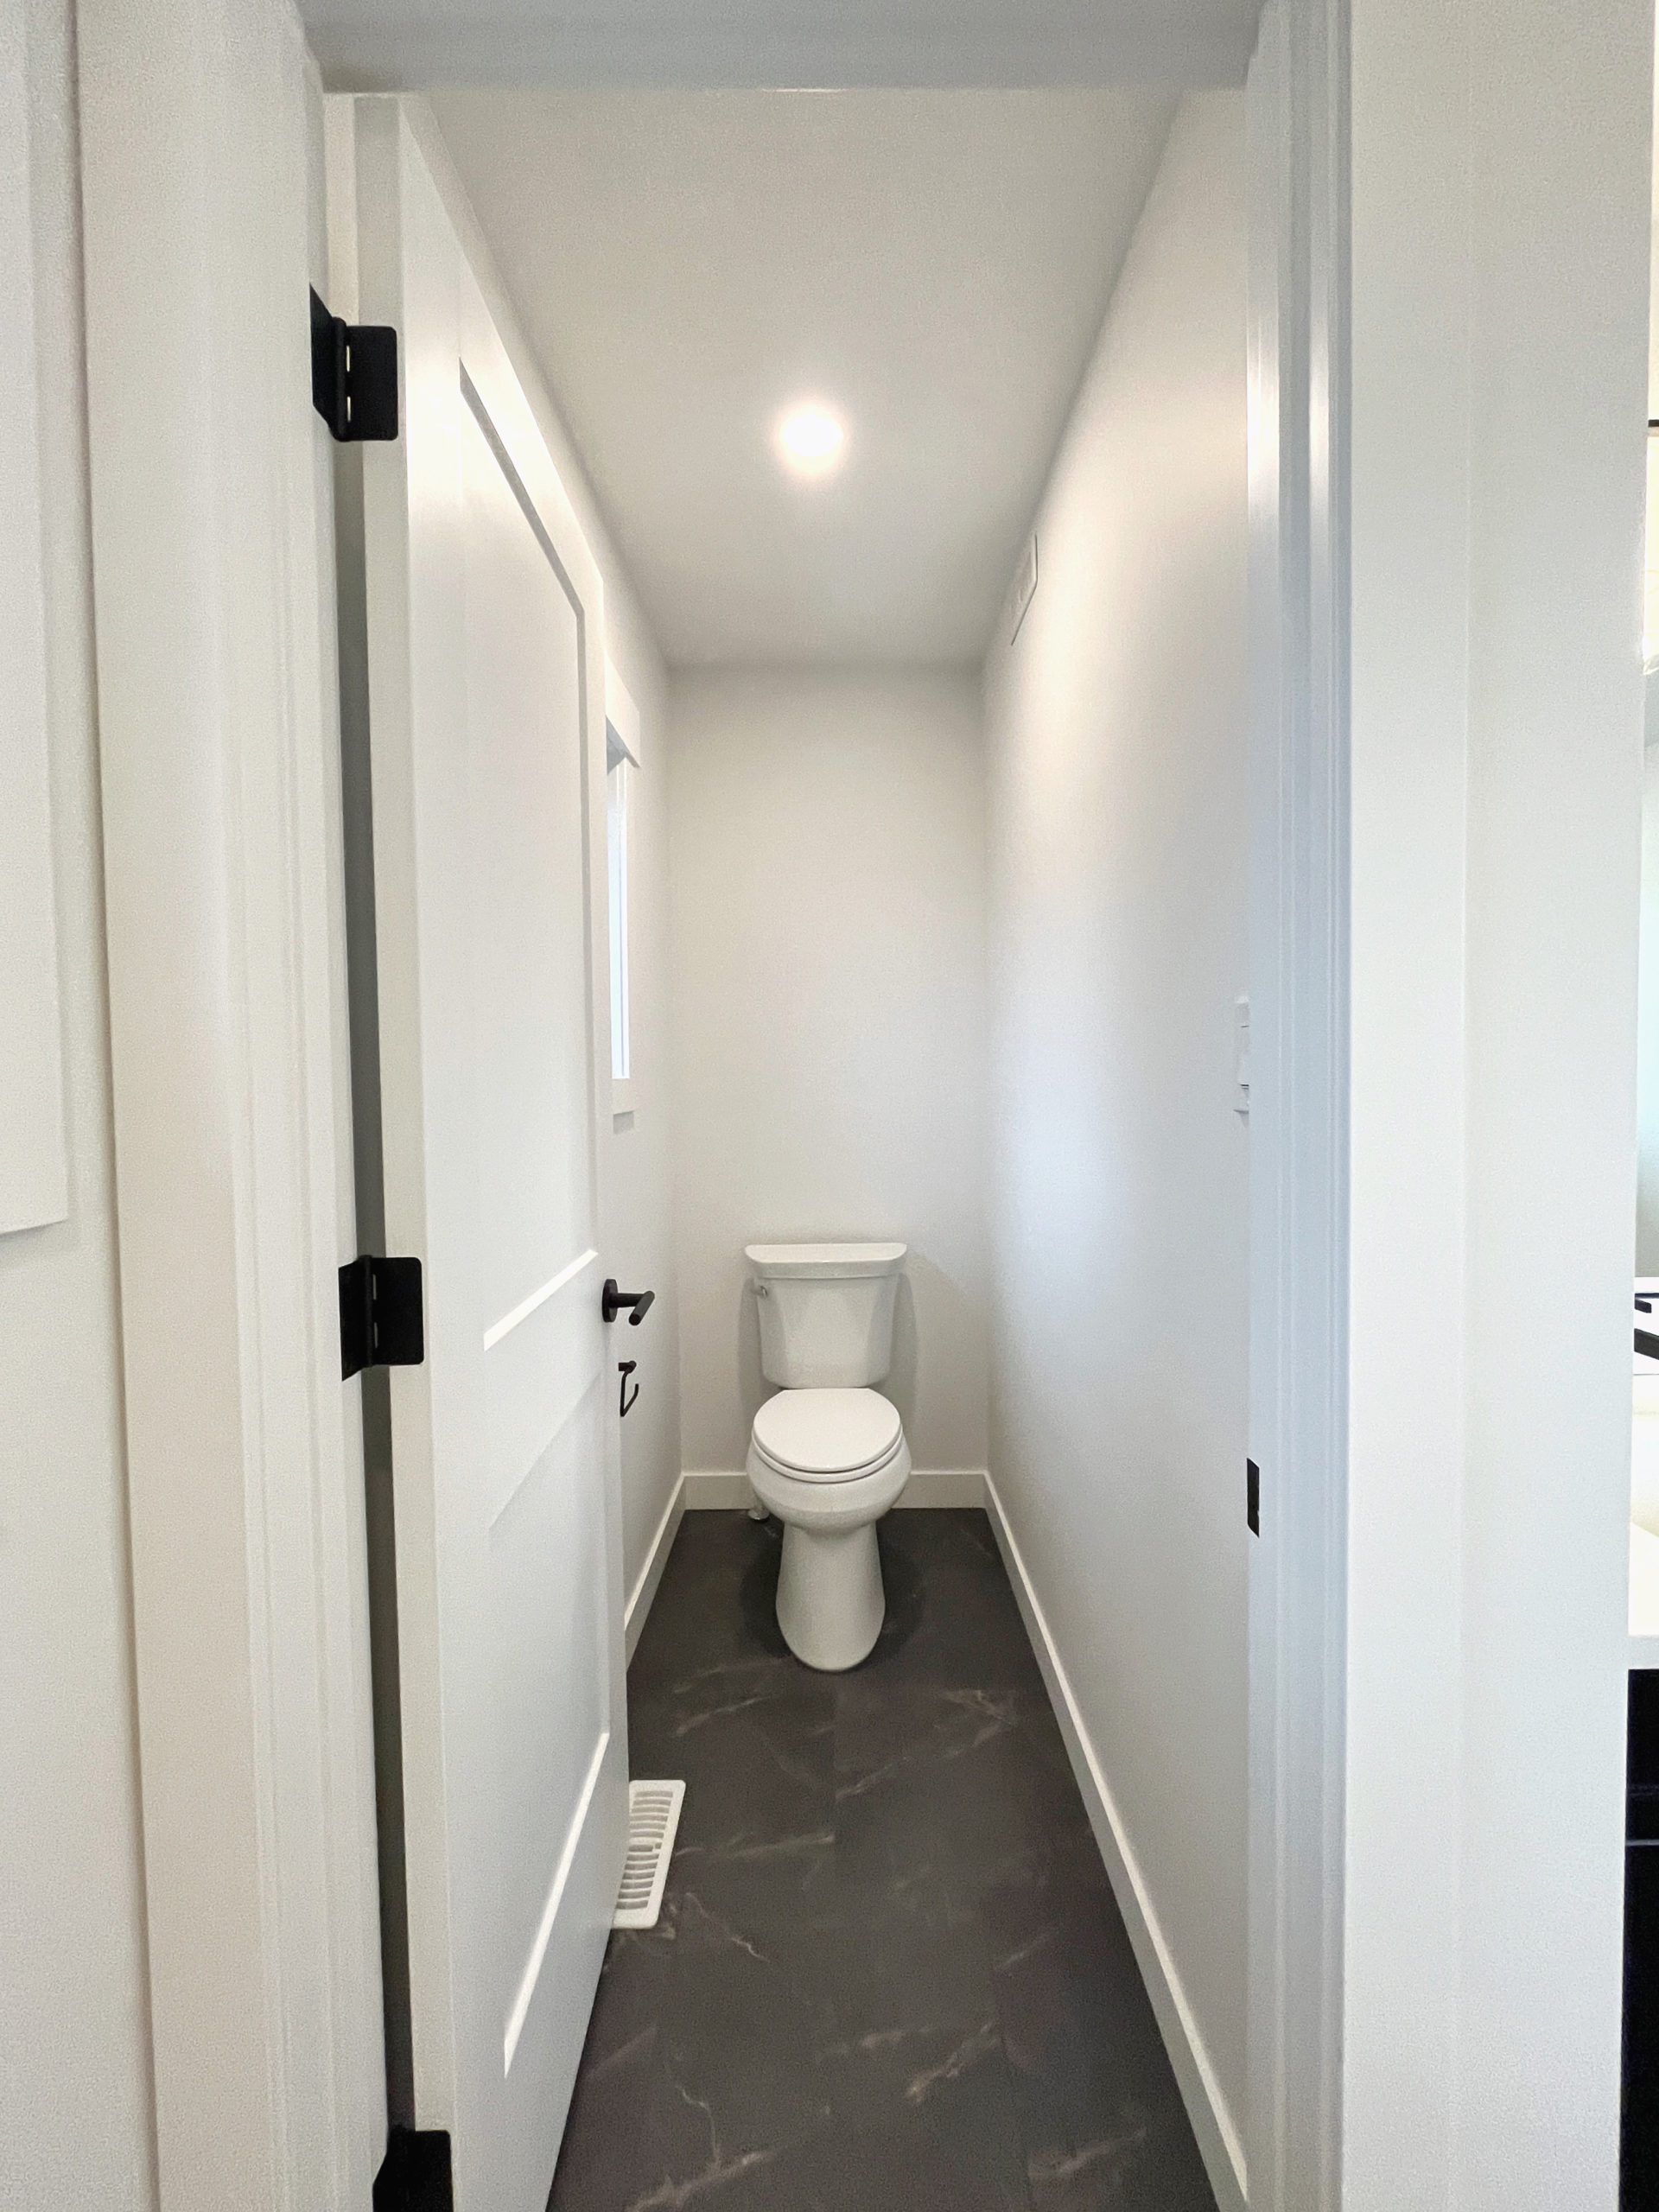 A water closet showing a toilet.